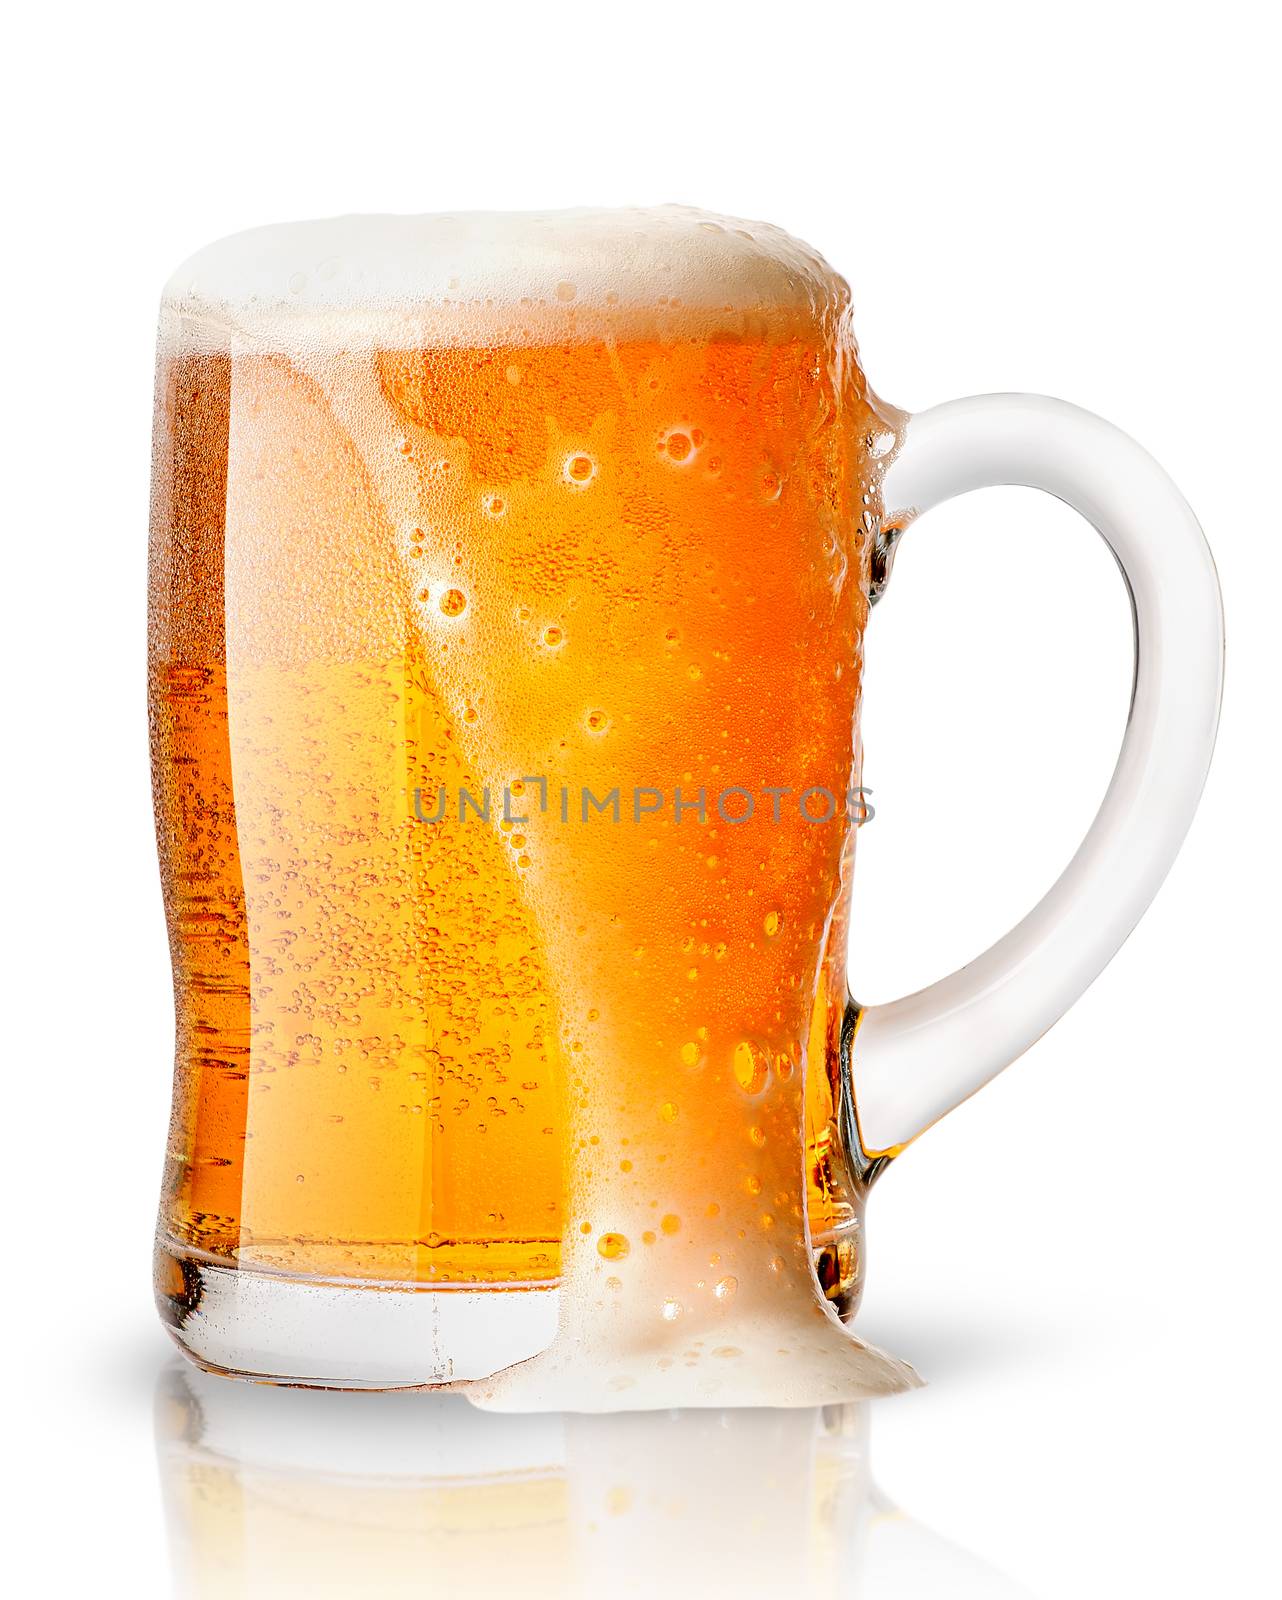 Light beer with foam in mug by Cipariss